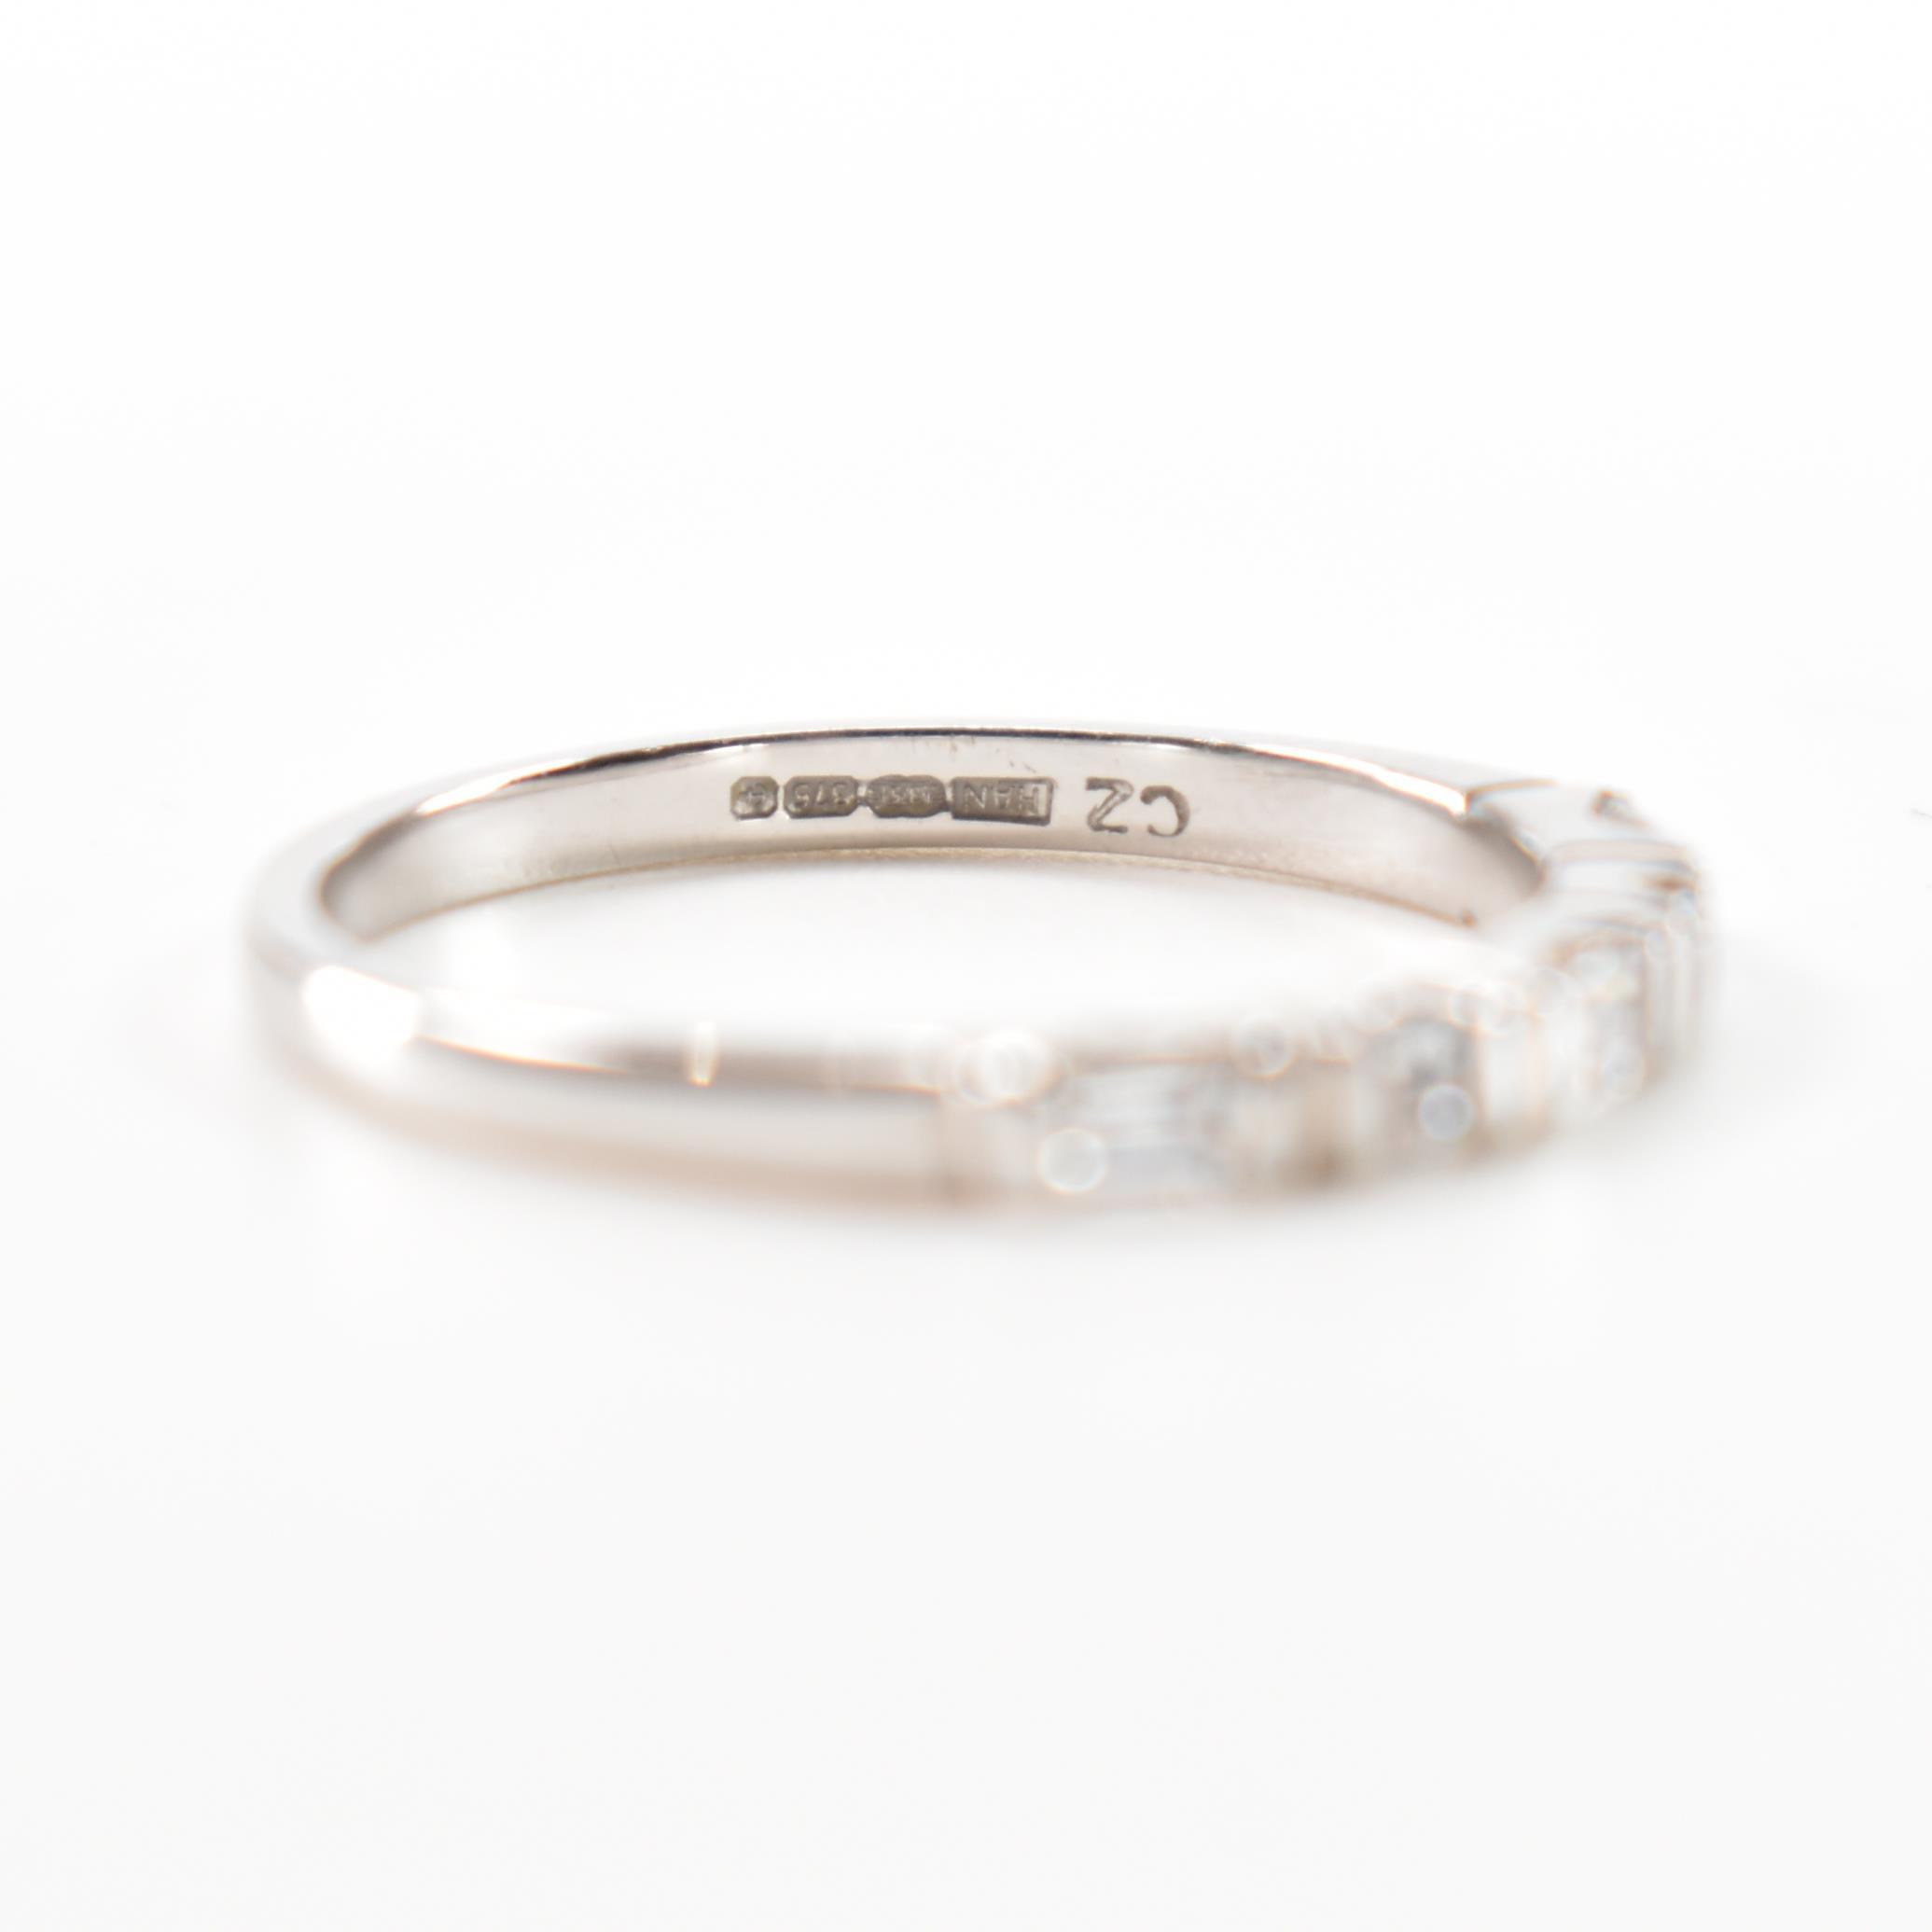 HALLMARKED 9CT WHITE GOLD & CZ ETERNITY RING - Image 6 of 8